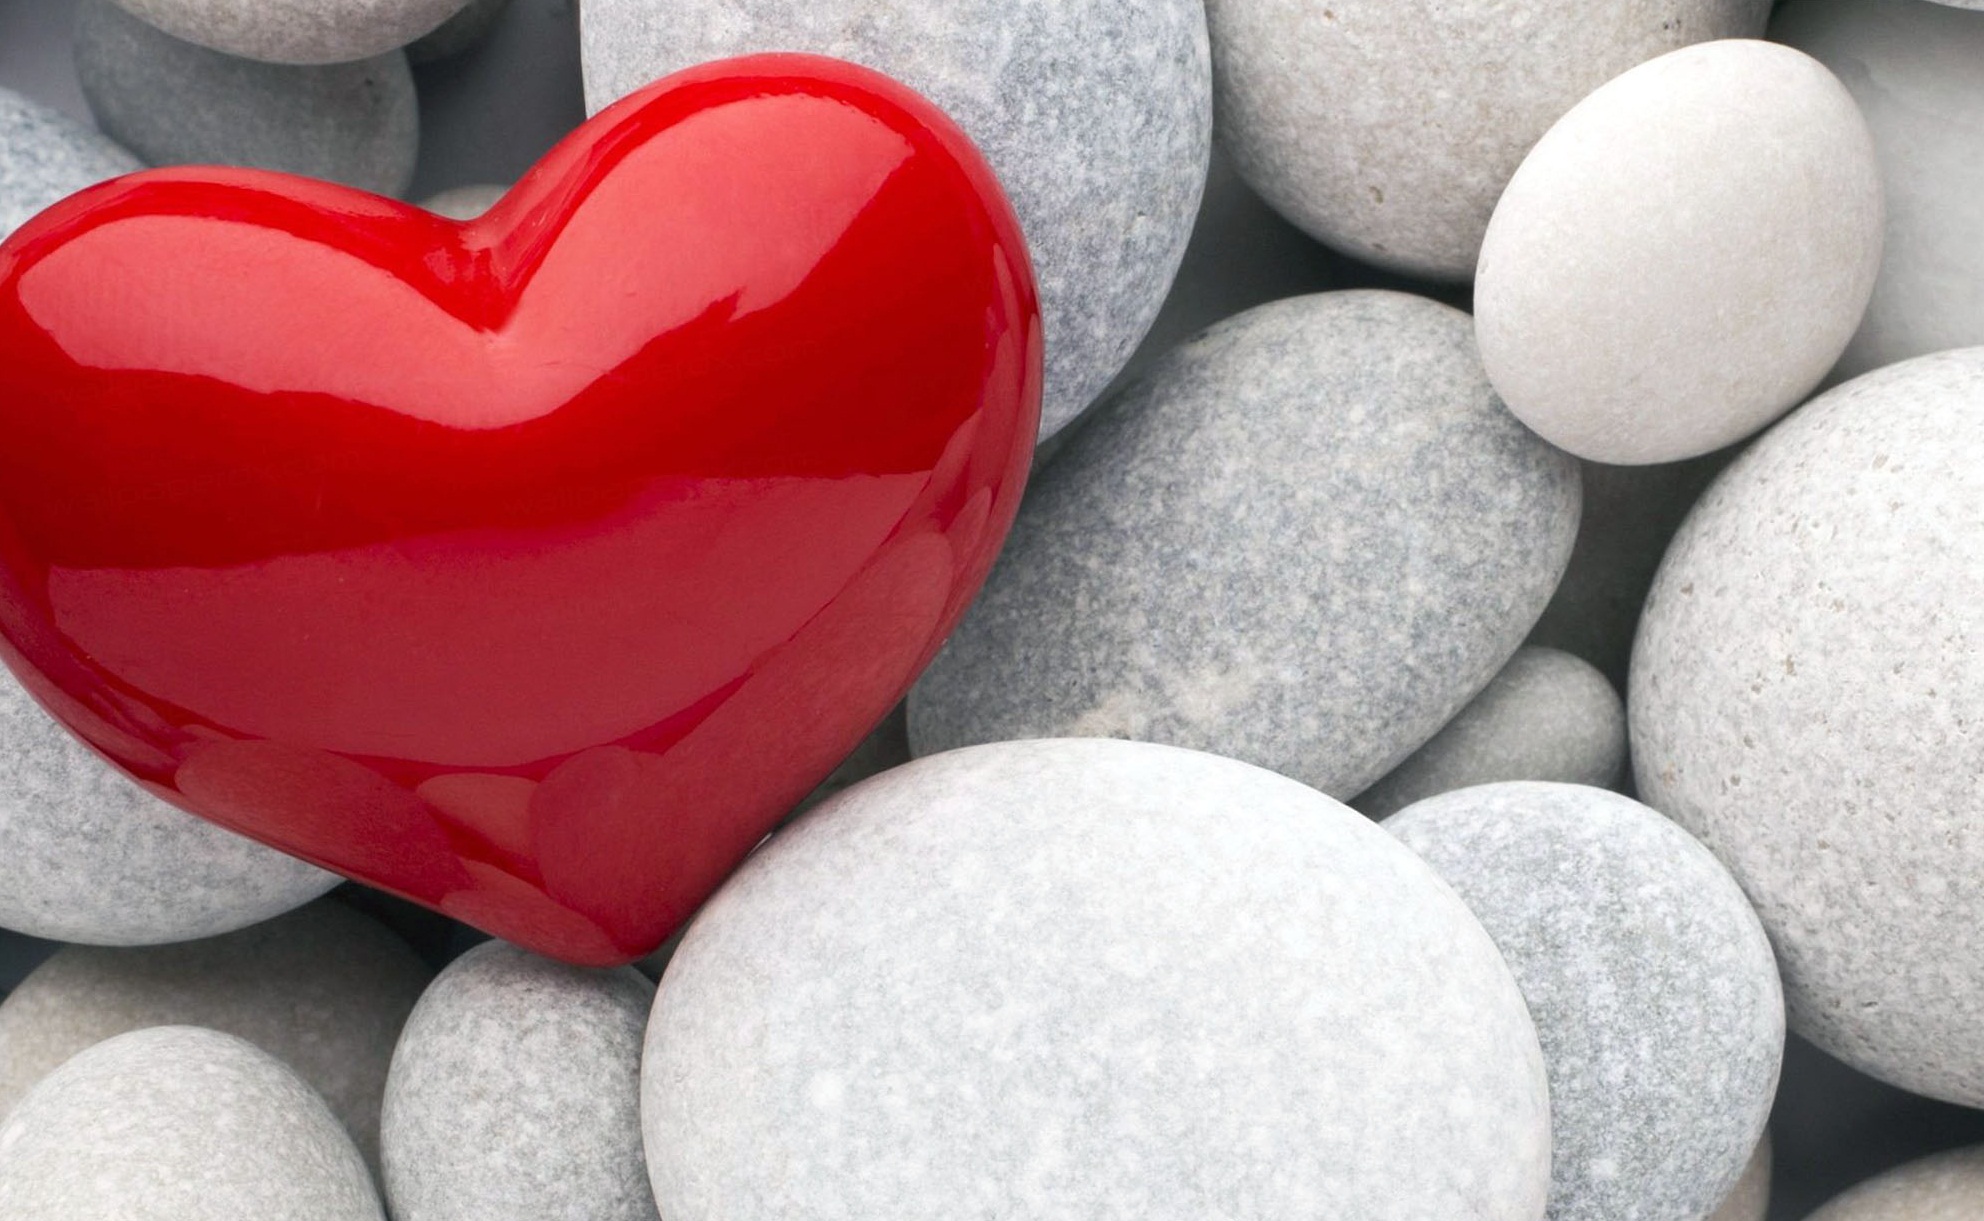 Red Heart And White Stones Love Full Hd Wallpaper Love - Red Heart Hd Wallpaper Download - HD Wallpaper 